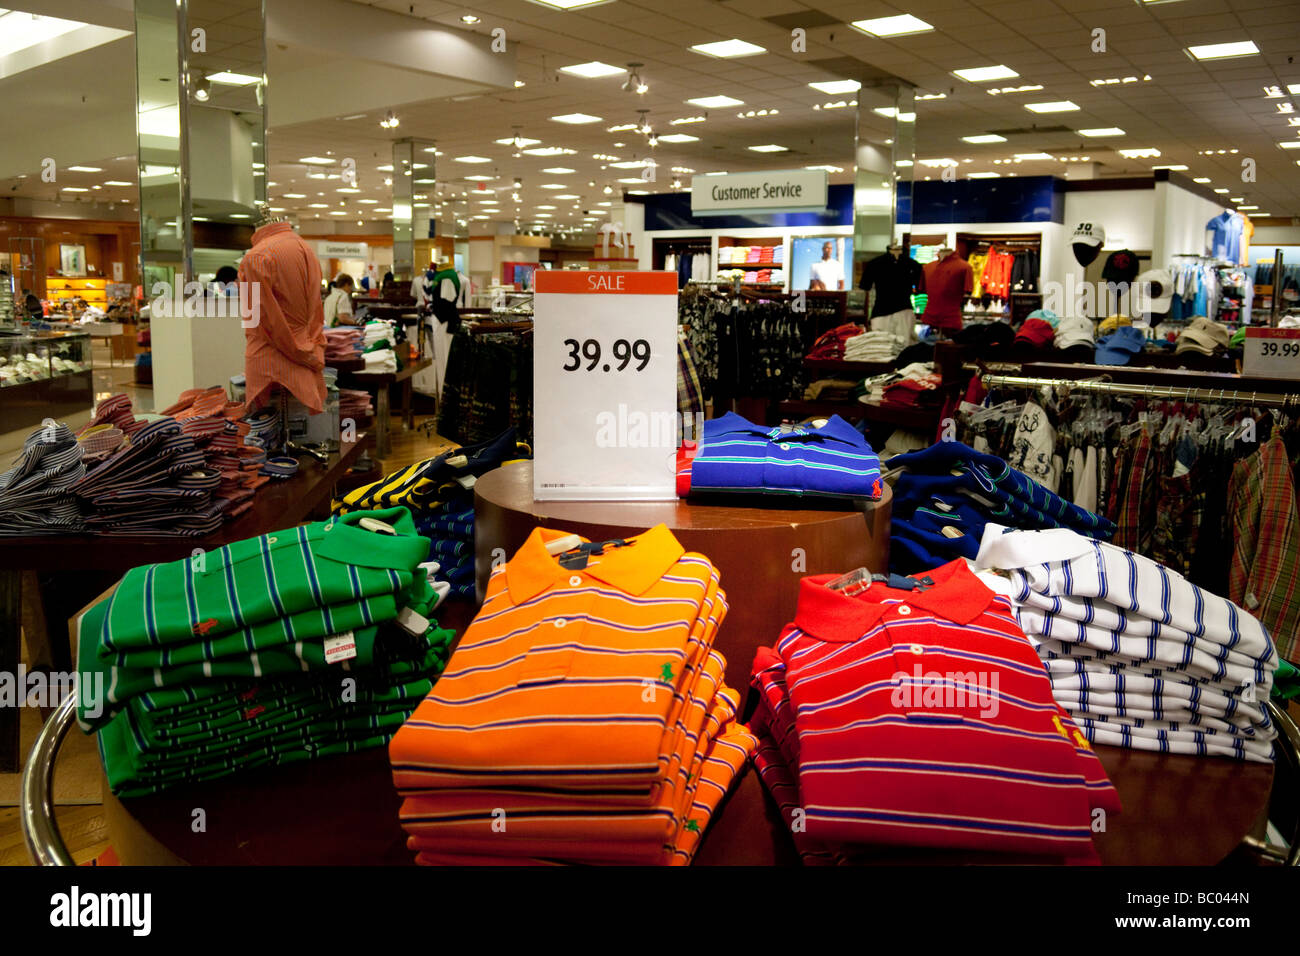 display of Polo shirts, Macy&#39;s department store, Montgomerville mall Stock Photo: 24589509 - Alamy